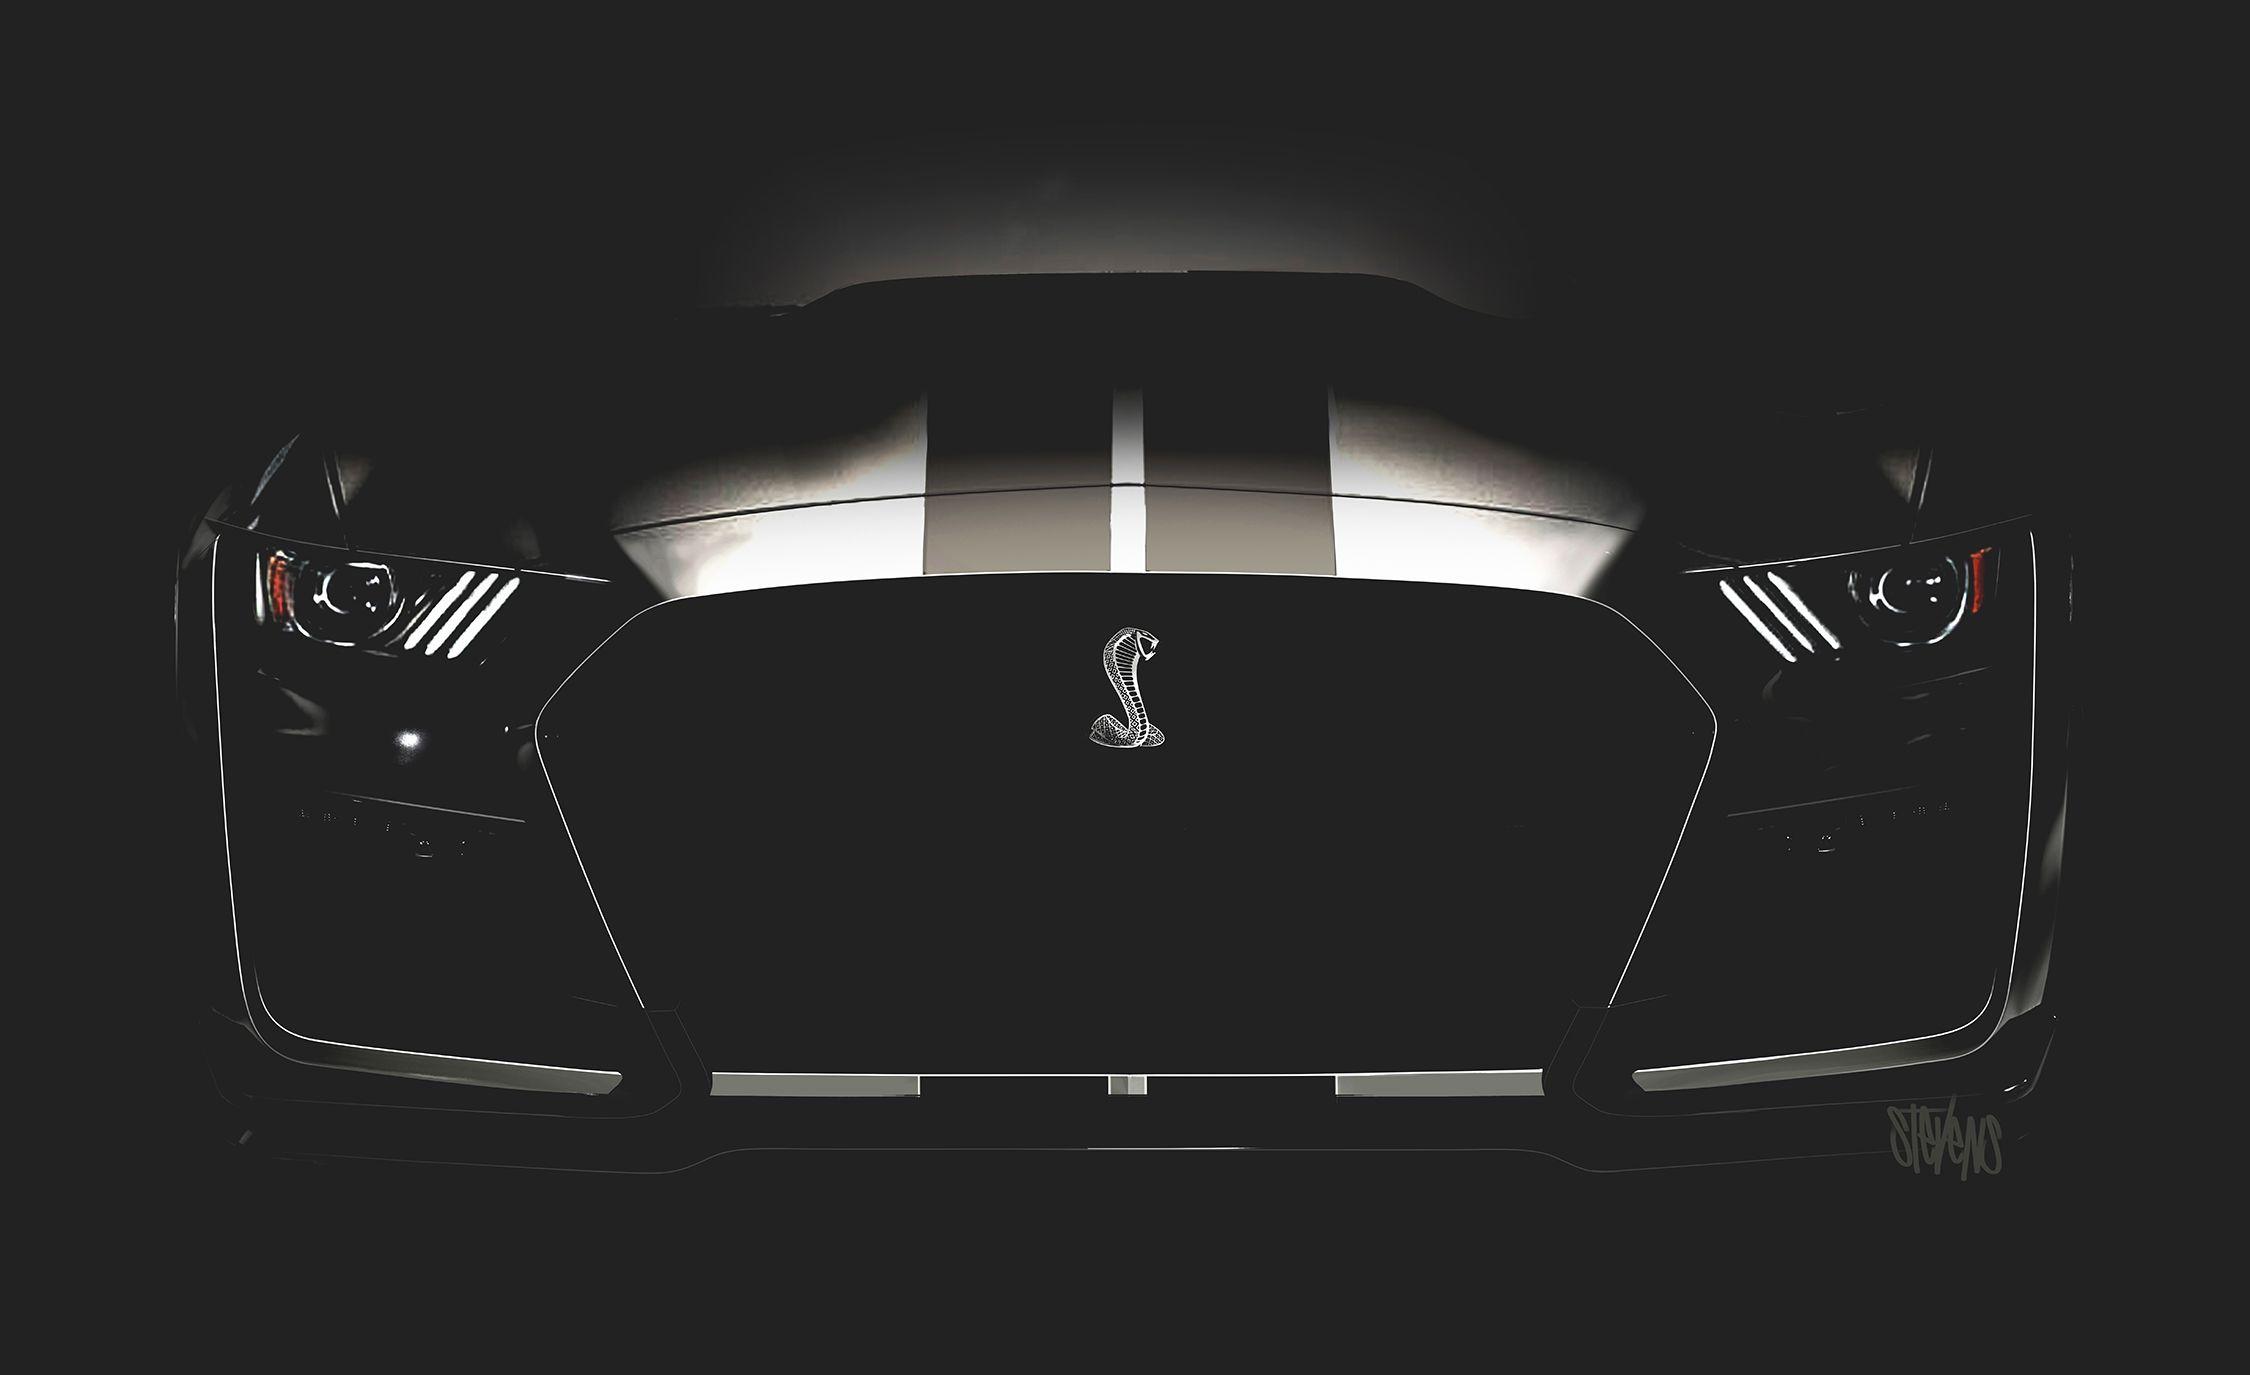 Black Ford Mustang Shelby Gt500 Wallpapers Wallpaper Cave